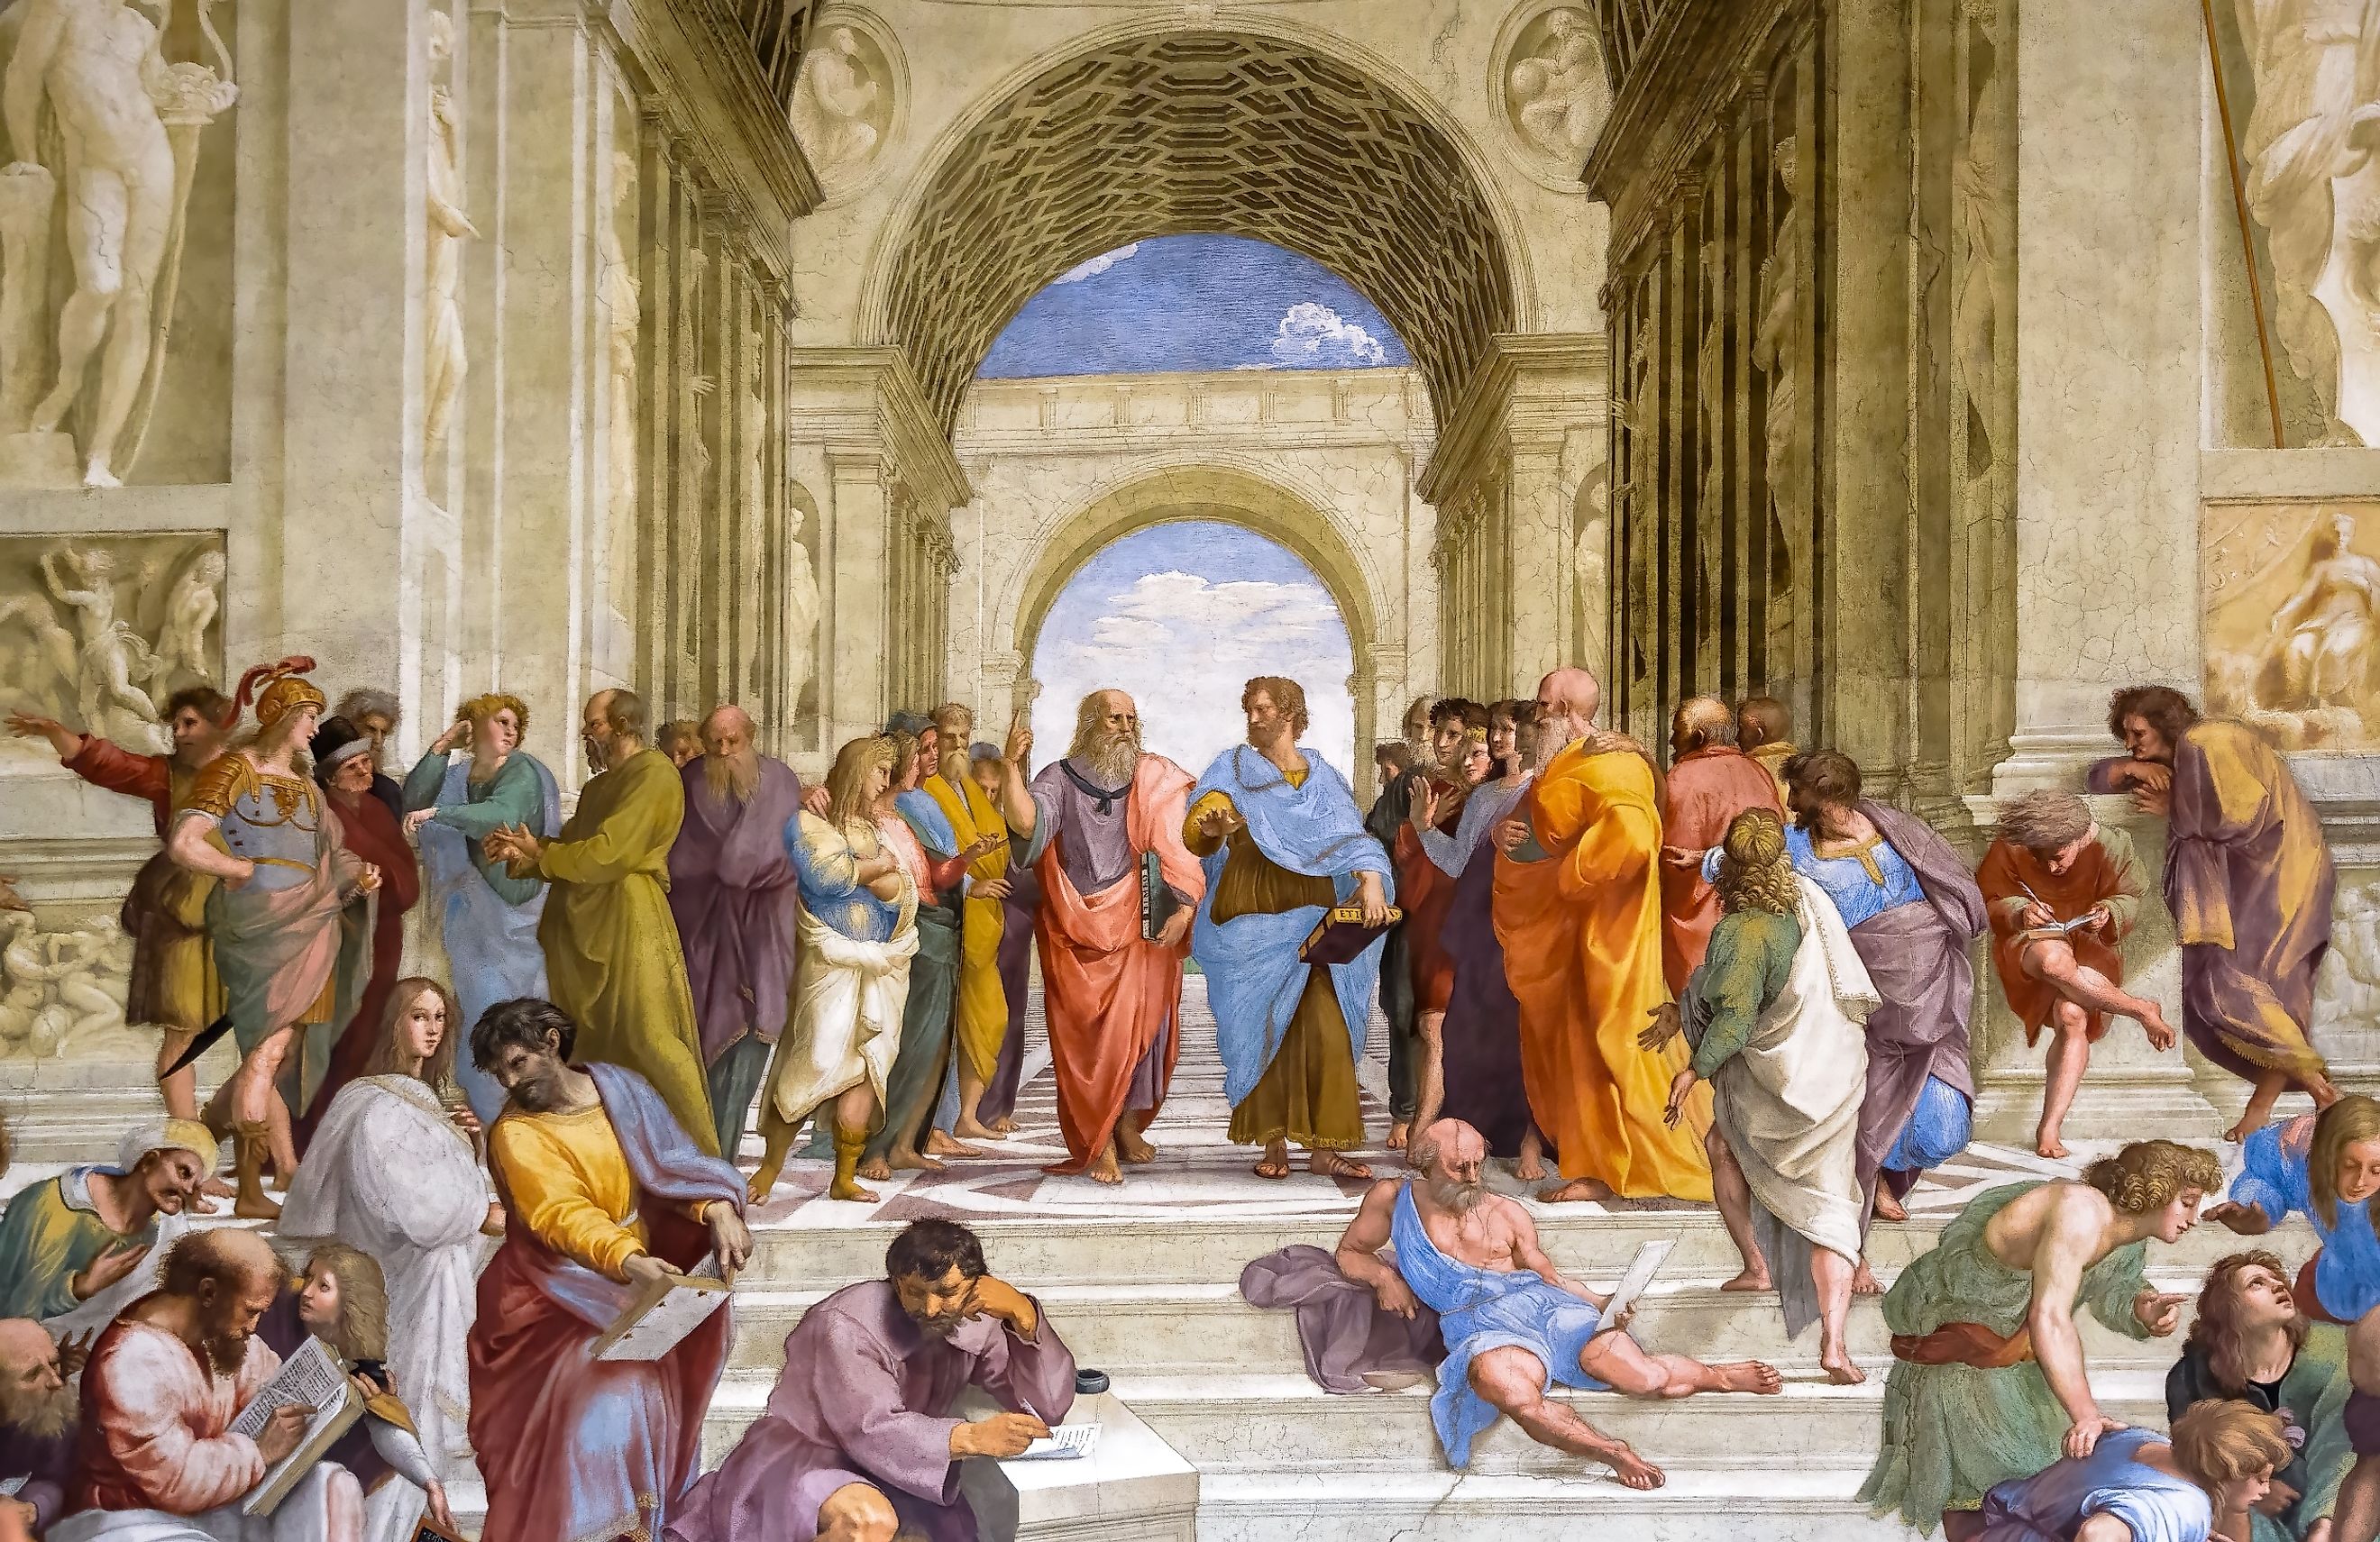 Painting by Raphael in Vatican Museum, Italy. Famous wall fresco School of Athens, philosophers Aristotle and Plato in center. Theme of Ancient Greek philosophy